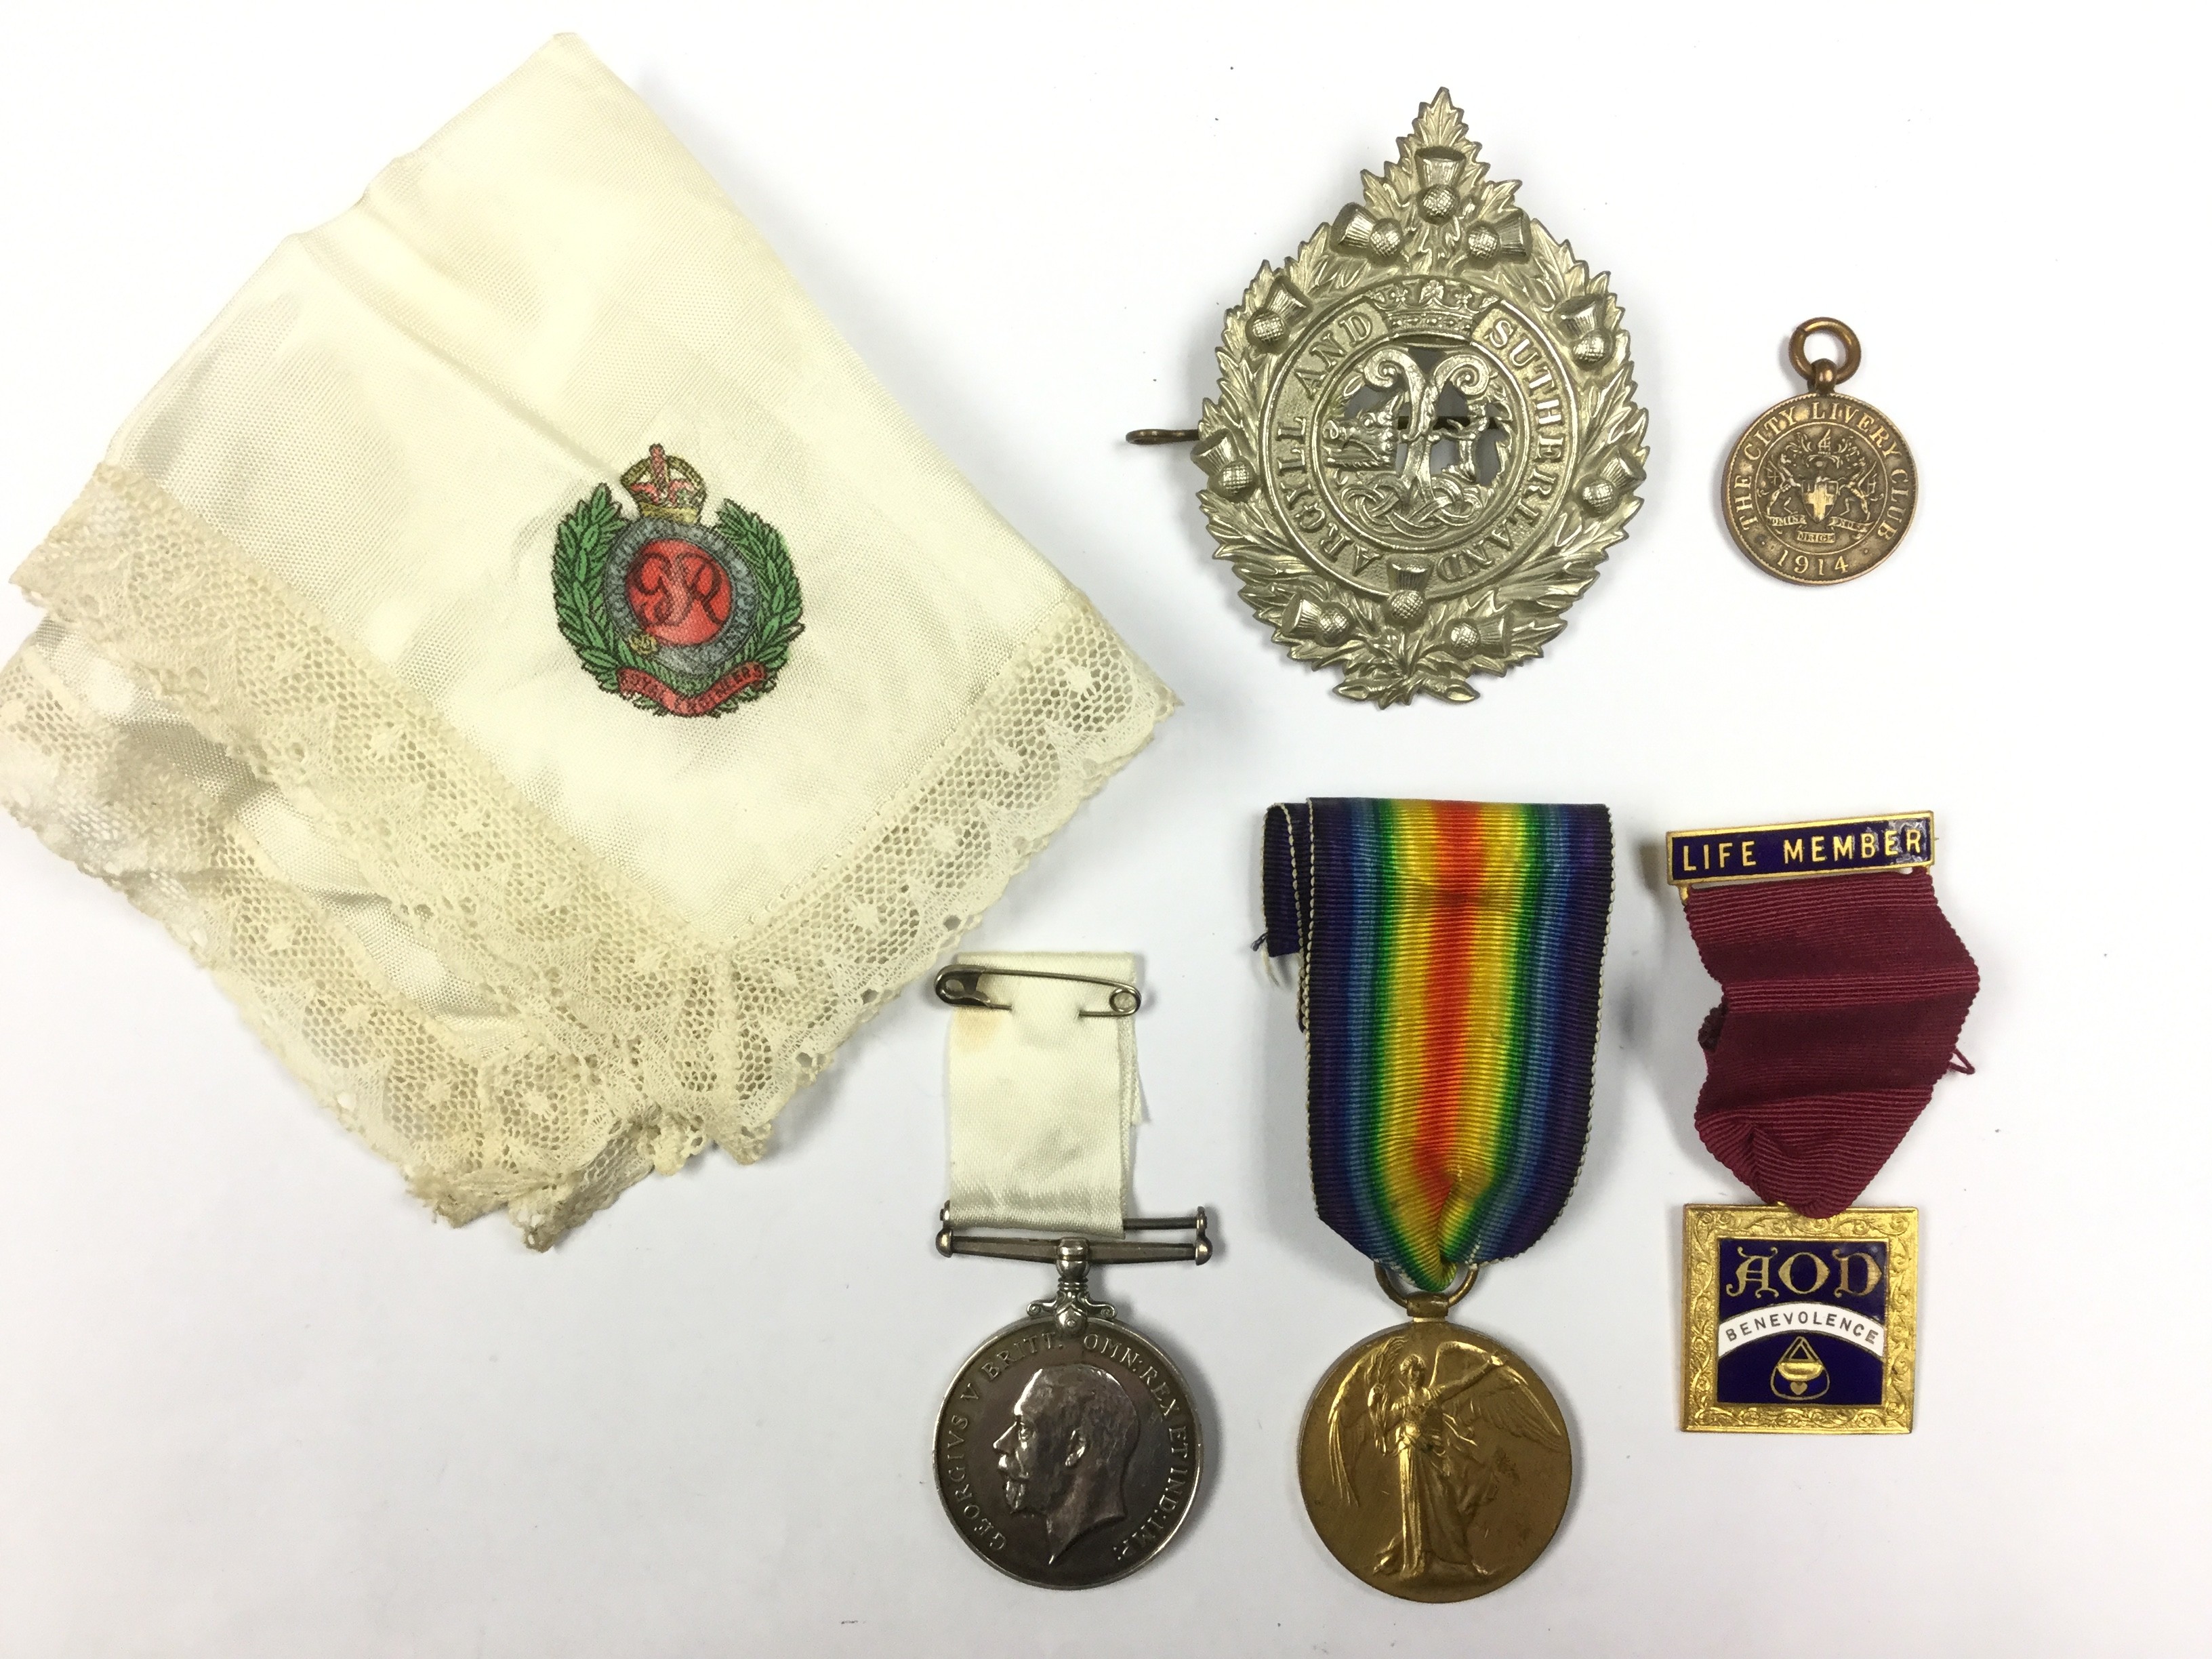 WW1 British War Medal to 120405 Gnr MW Moore,